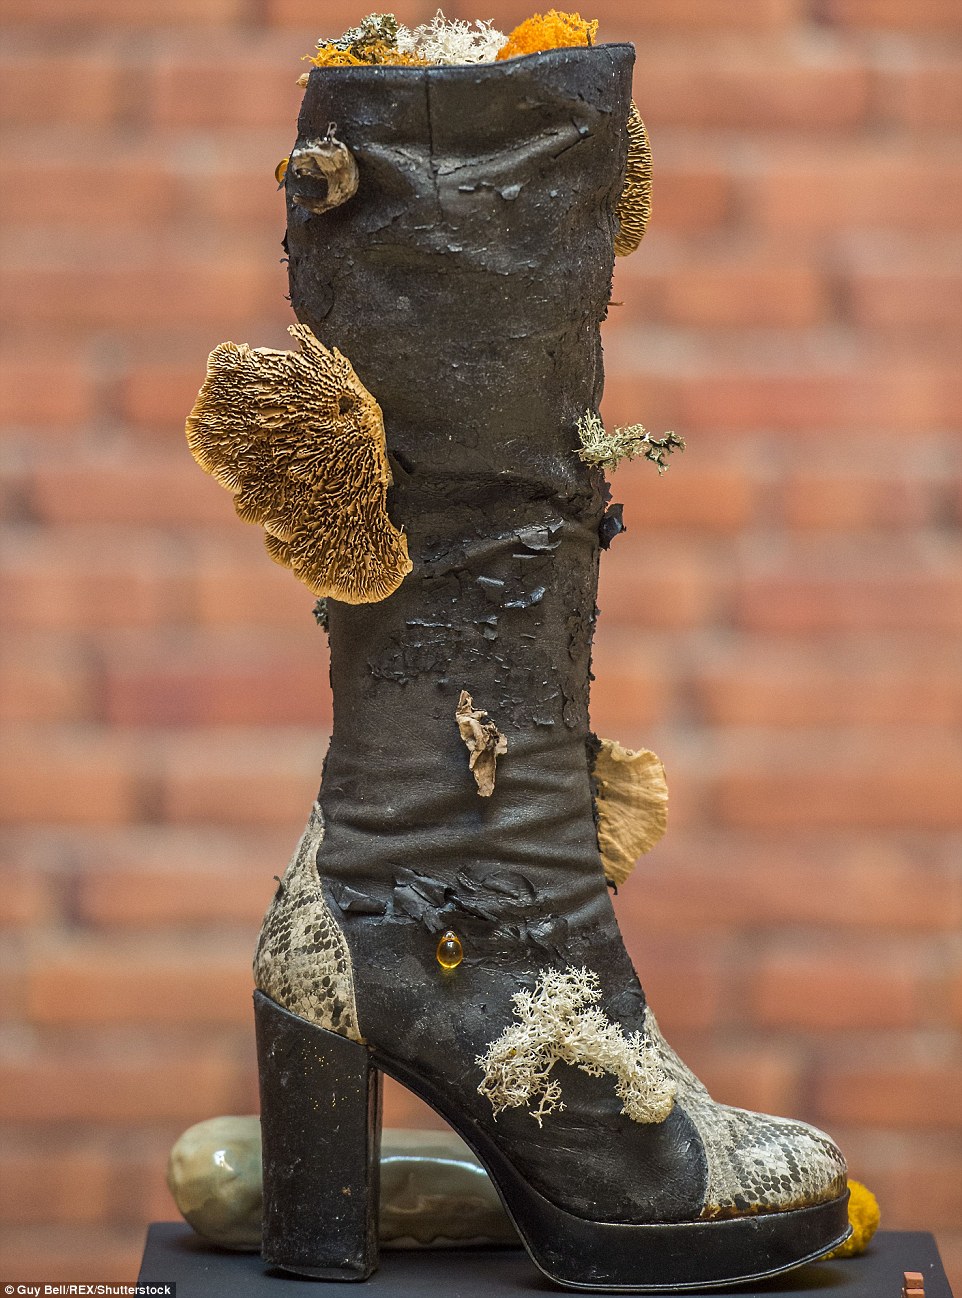 Hamilton has also produced Natural Livin' Boot which shows a tatty old piece of footwear, to go with her brick suit and giant buttox